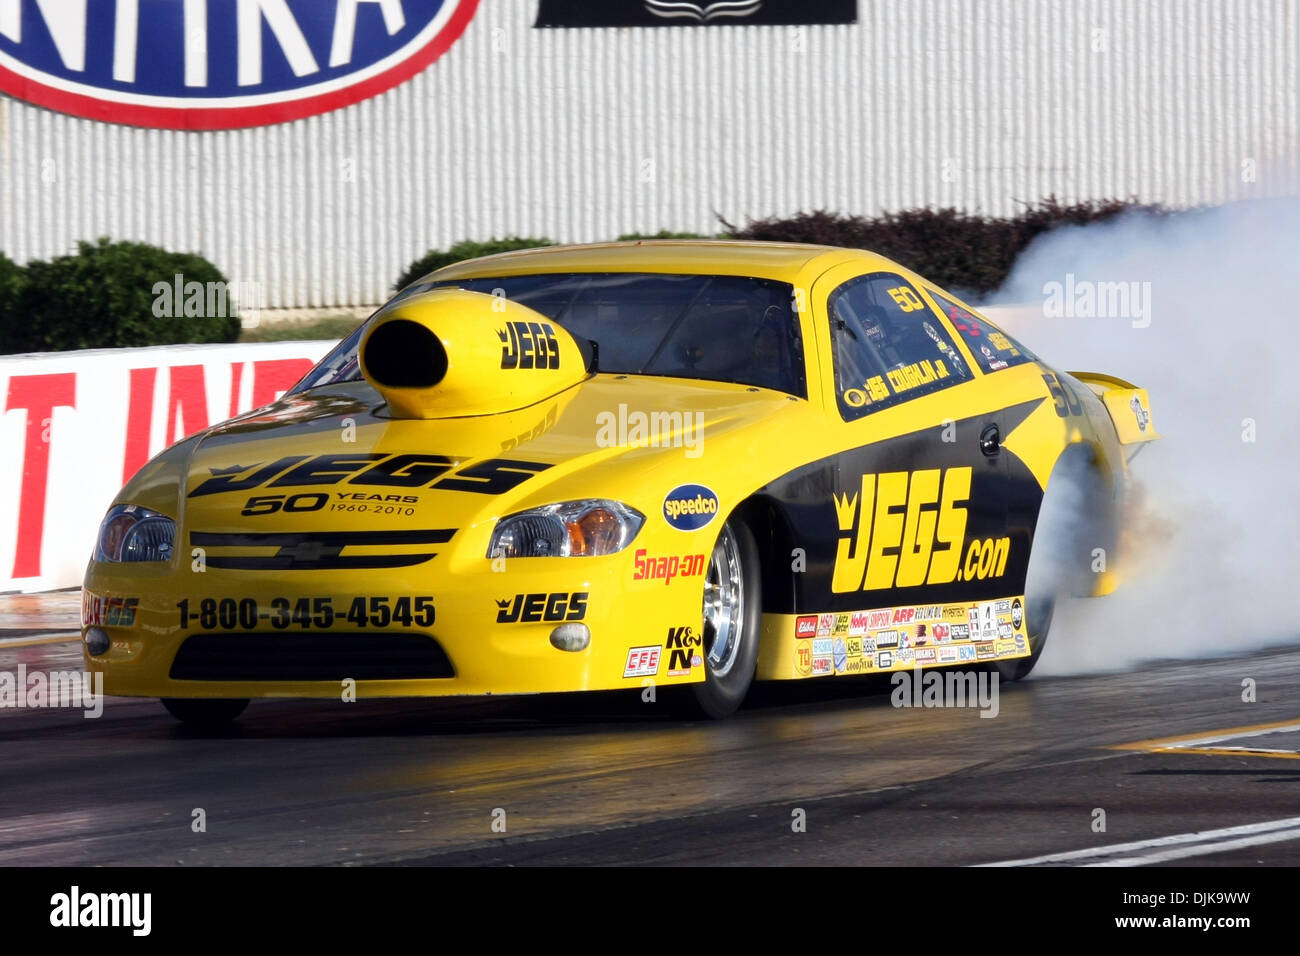 Sep. 03, 2010 - Indianapolis, Indiana, United States of America - 03 September 2010: Jeg Coughlin Jr. does a burnout. The Mac Tools U.S. Nationals were held at O'Reilly Raceway Park in Indianapolis, Indiana. (Credit Image: © Alan Ashley/Southcreek Global/ZUMApress.com) Stock Photo